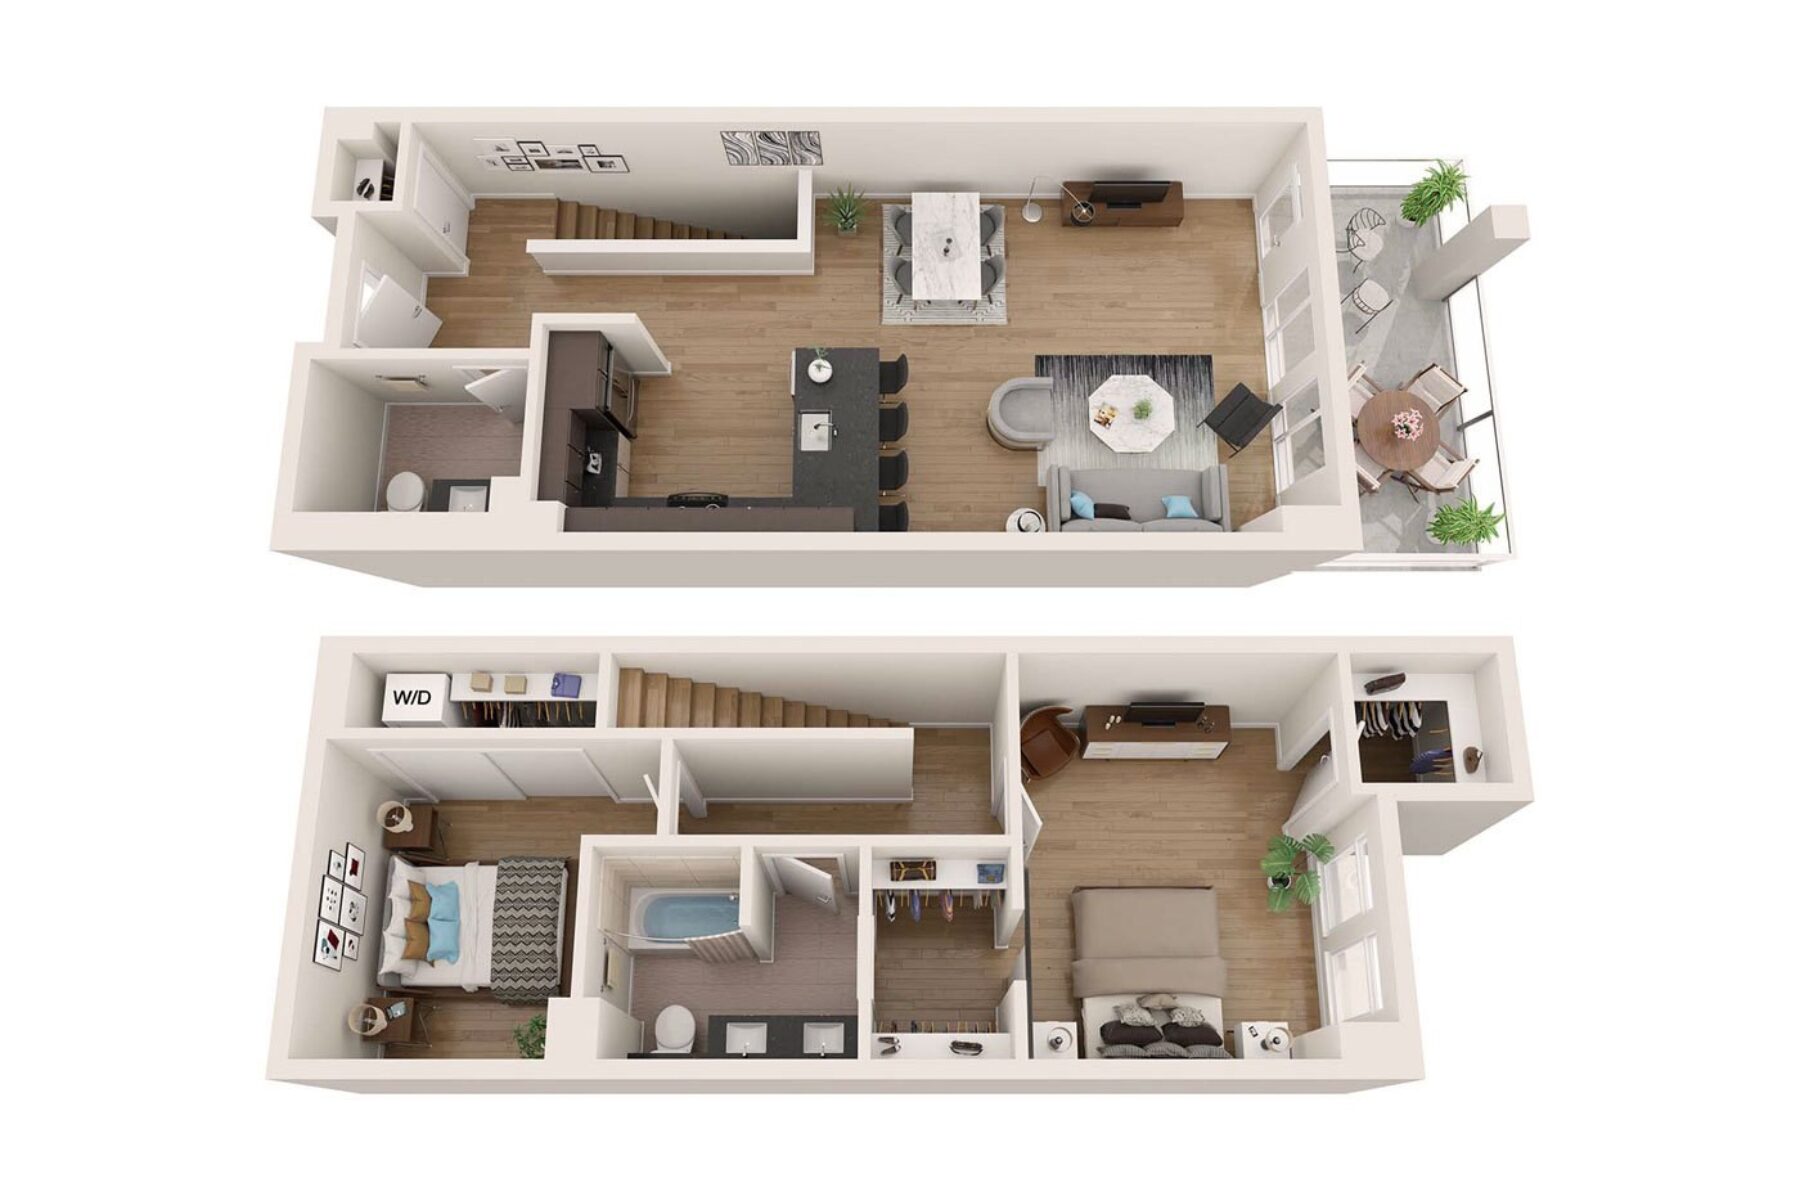 Plan Image: TH.1 - Two Bedroom Townhome w/ Balcony